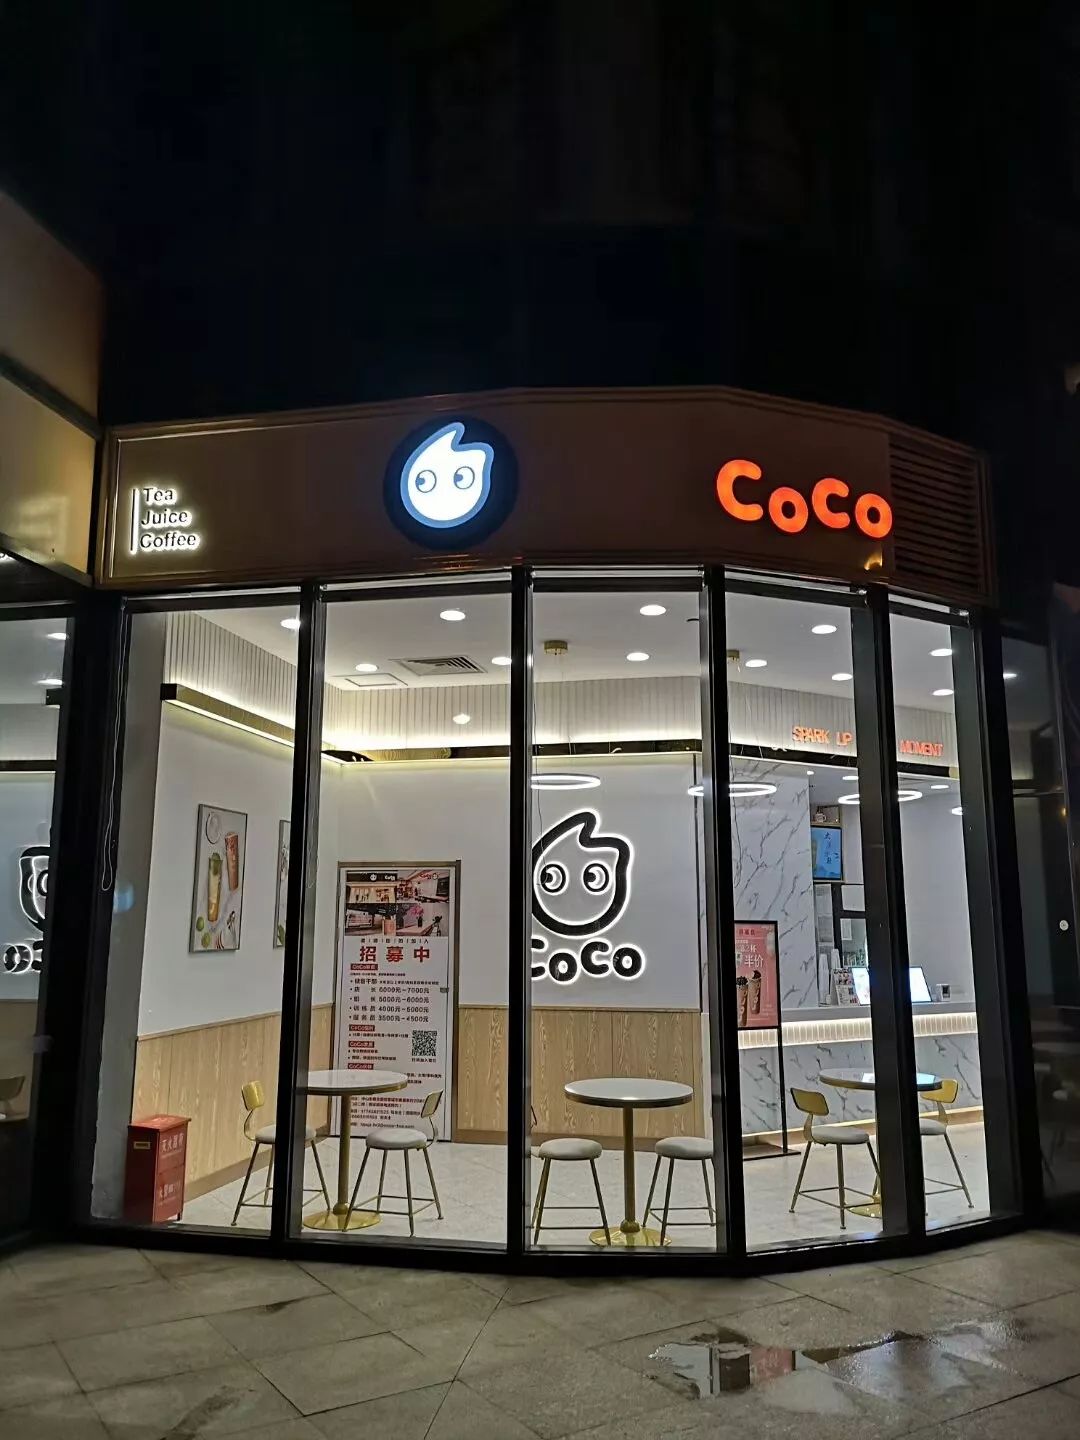 Coco门头图片